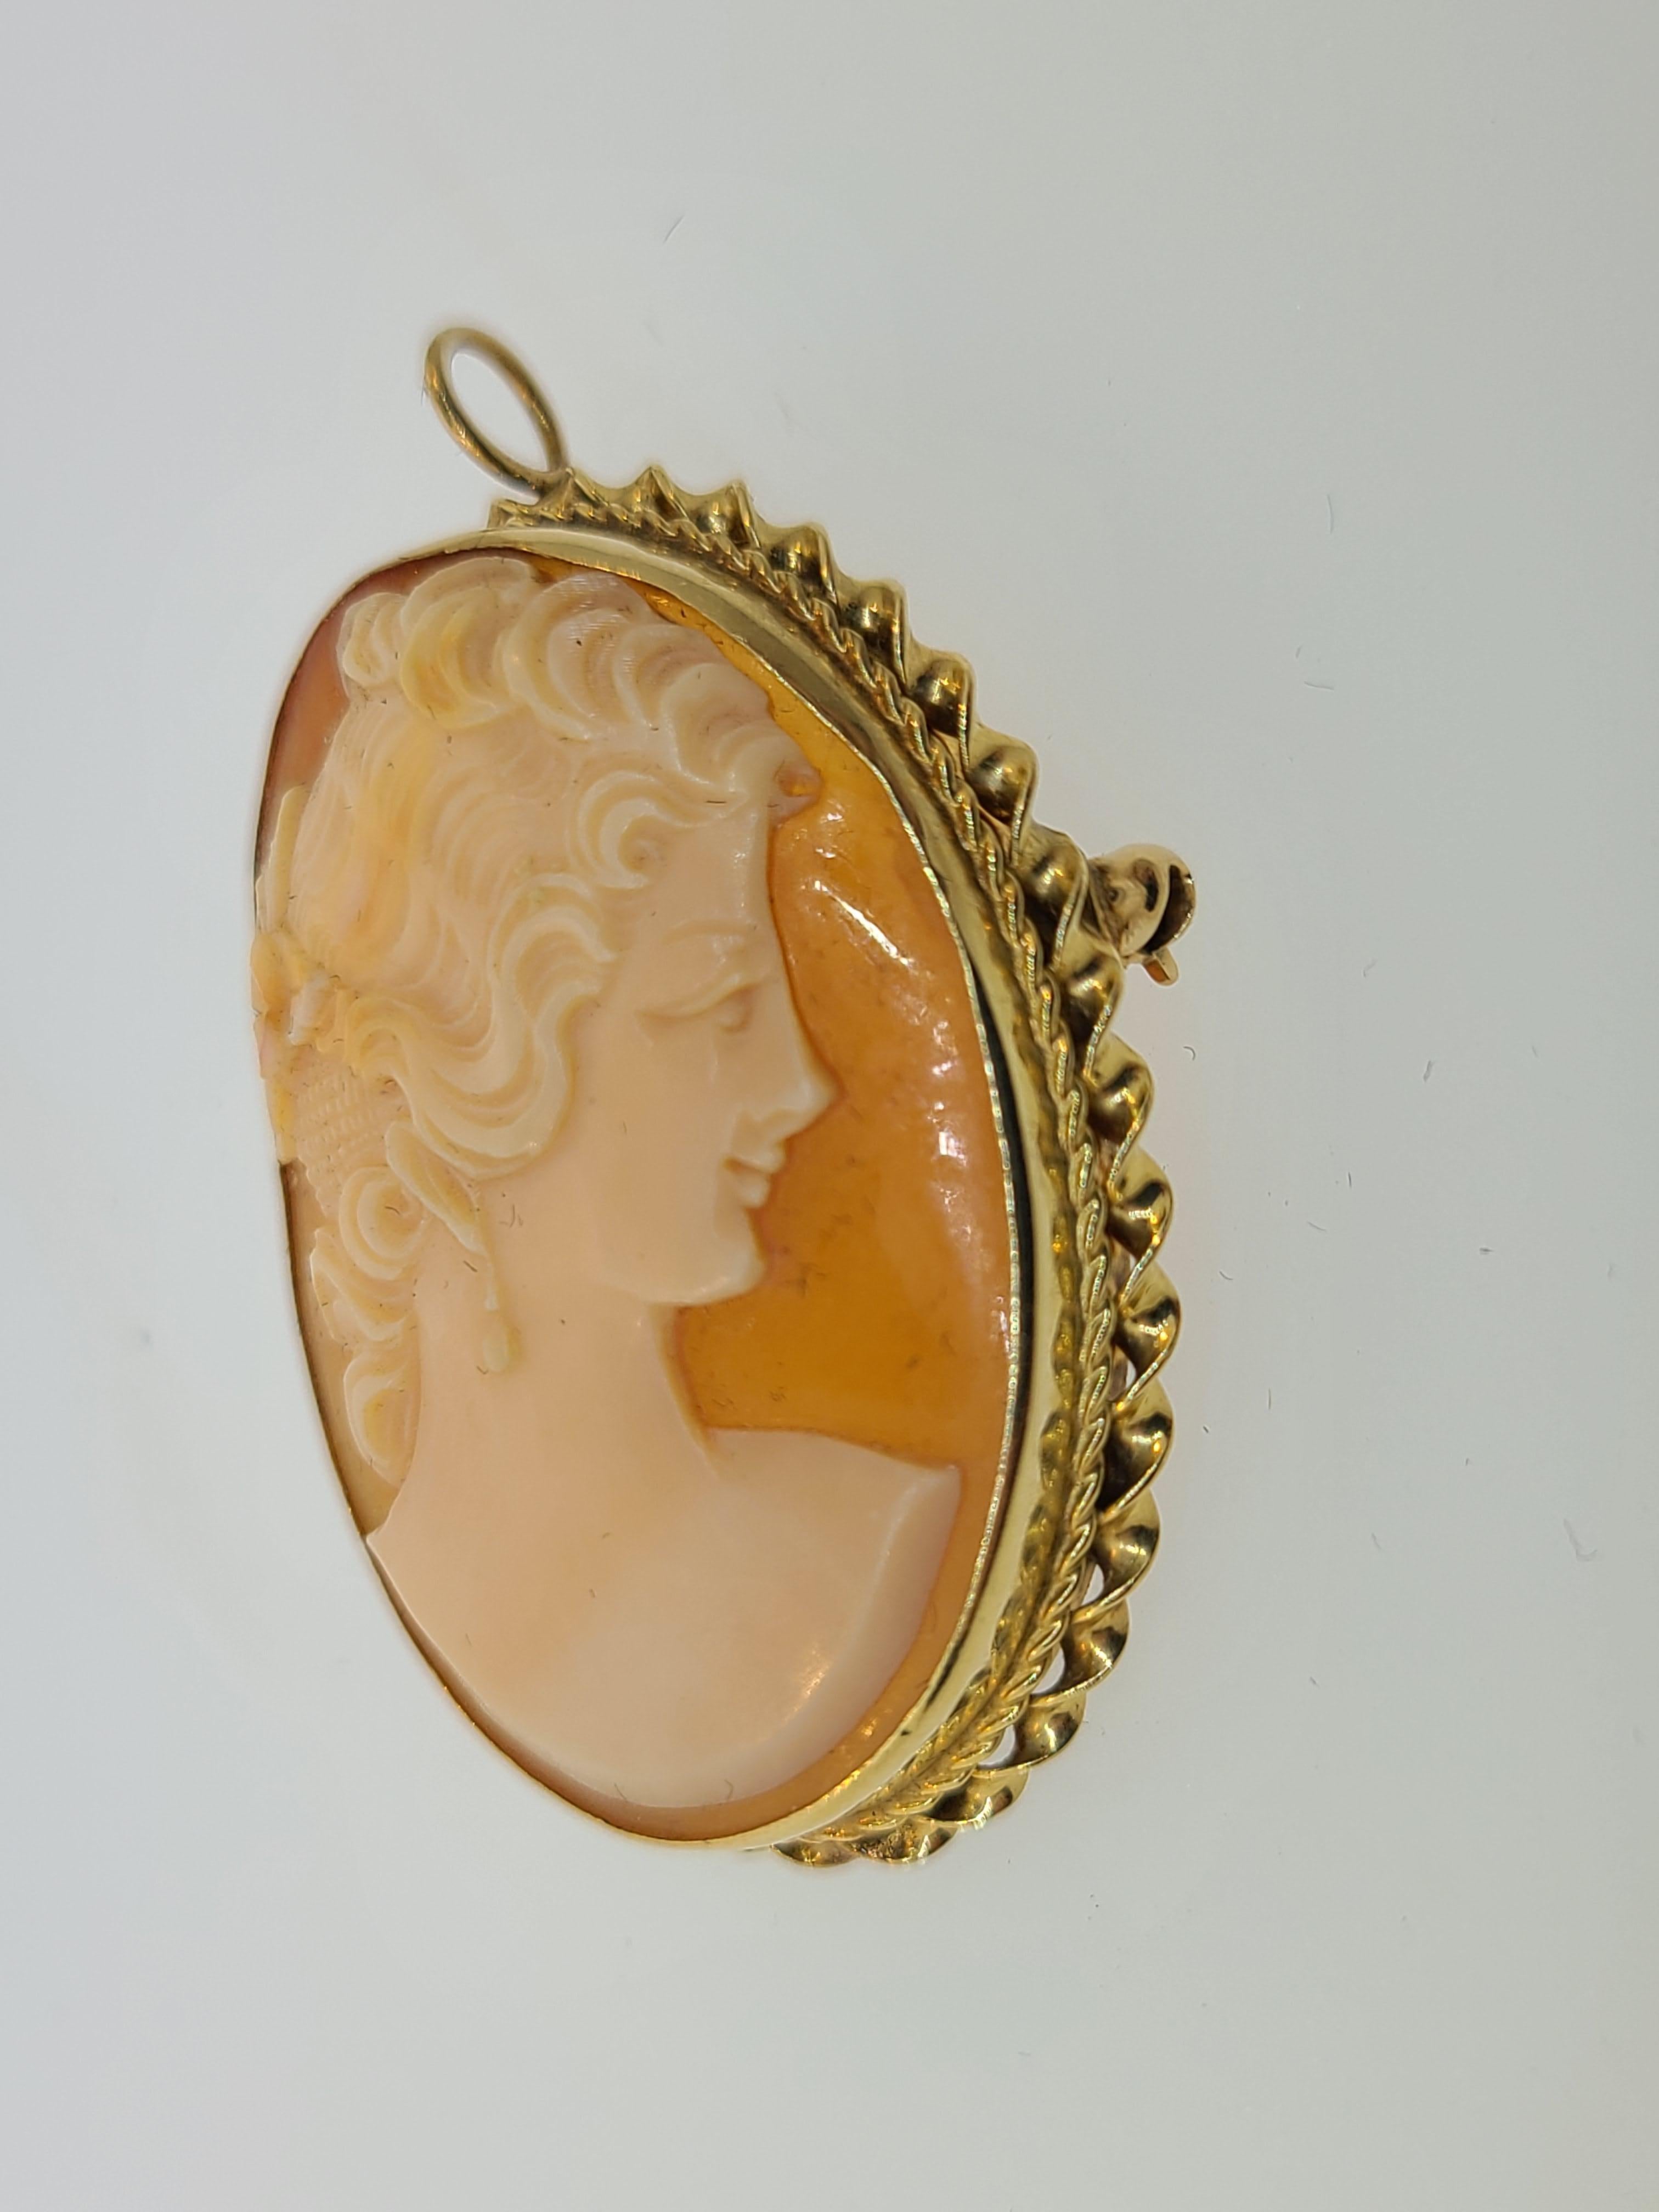 This estate found early 20th century 14K yellow gold cameo brooch pendant features a lovely lady's profile that can be worn as a brooch or a pendant.
Size: 38 mm x 30 mm
Stamped: 14K